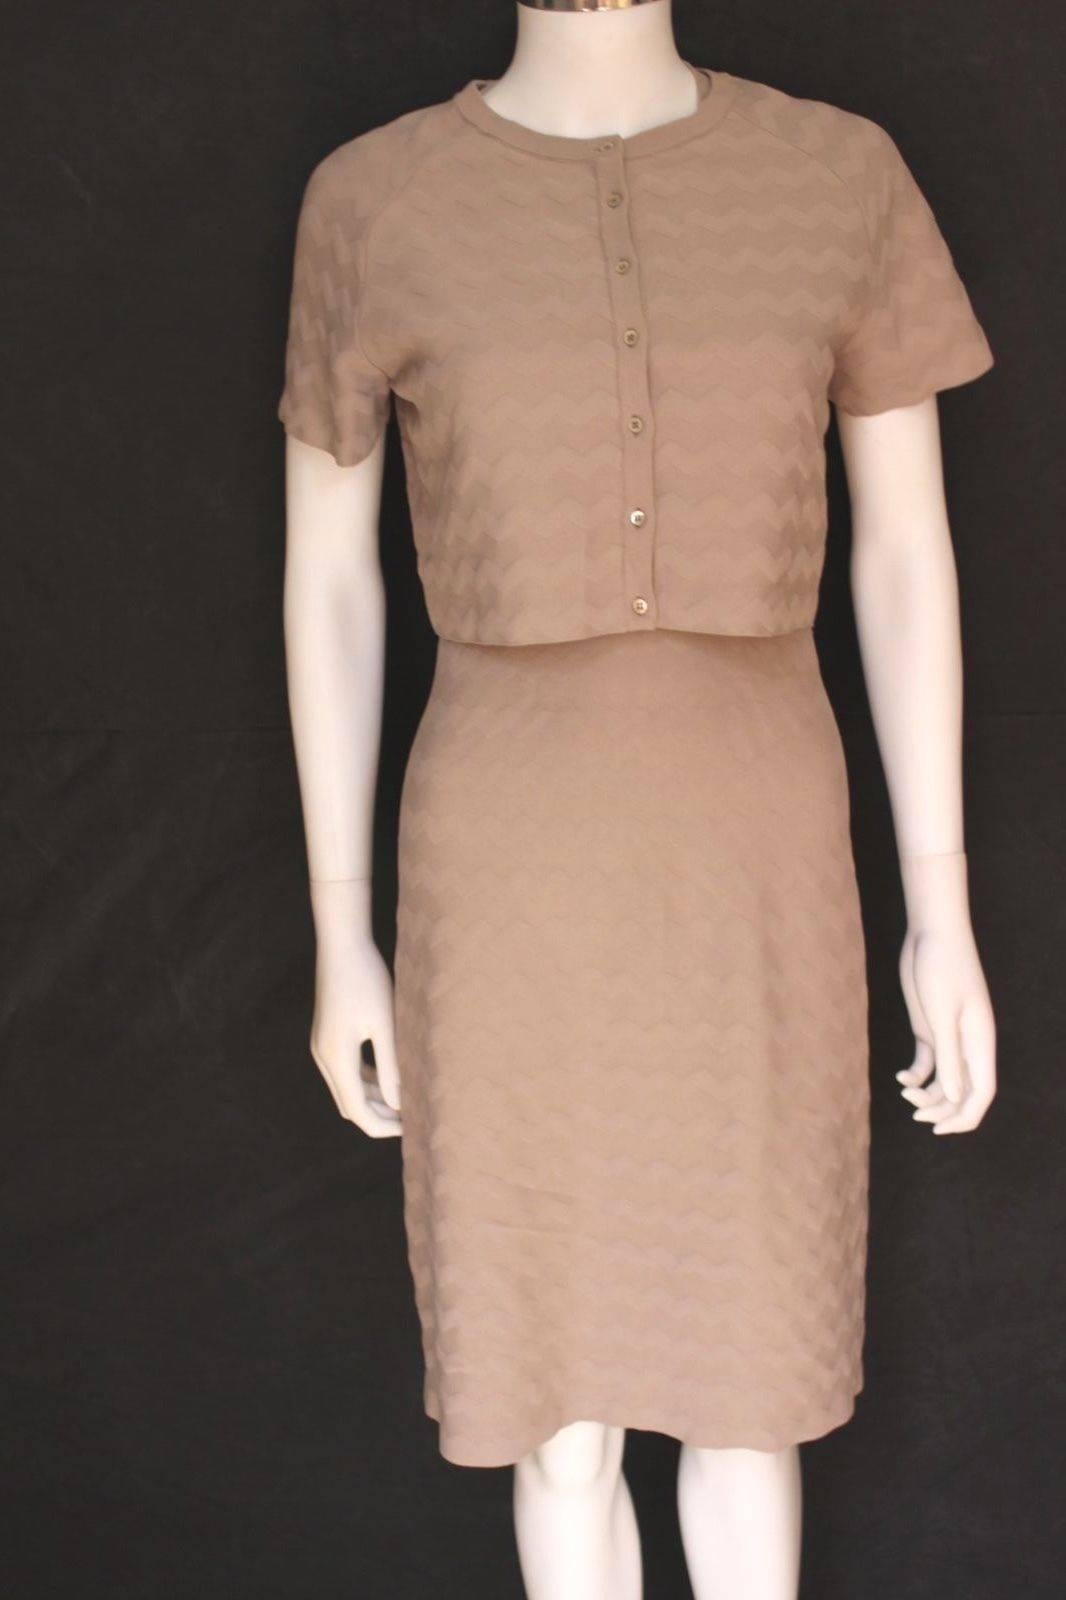 Alaia Dusky Beige Chevron Stretch Knit Dress with Matching Top  F42 uk 12
Gorgeous dress from Alaia featuring a matching short sleeve cardigan 
The colour is beige with a hint of pink 
Zip fastening
Length 38 inches, chest 16 inches across, waist 13